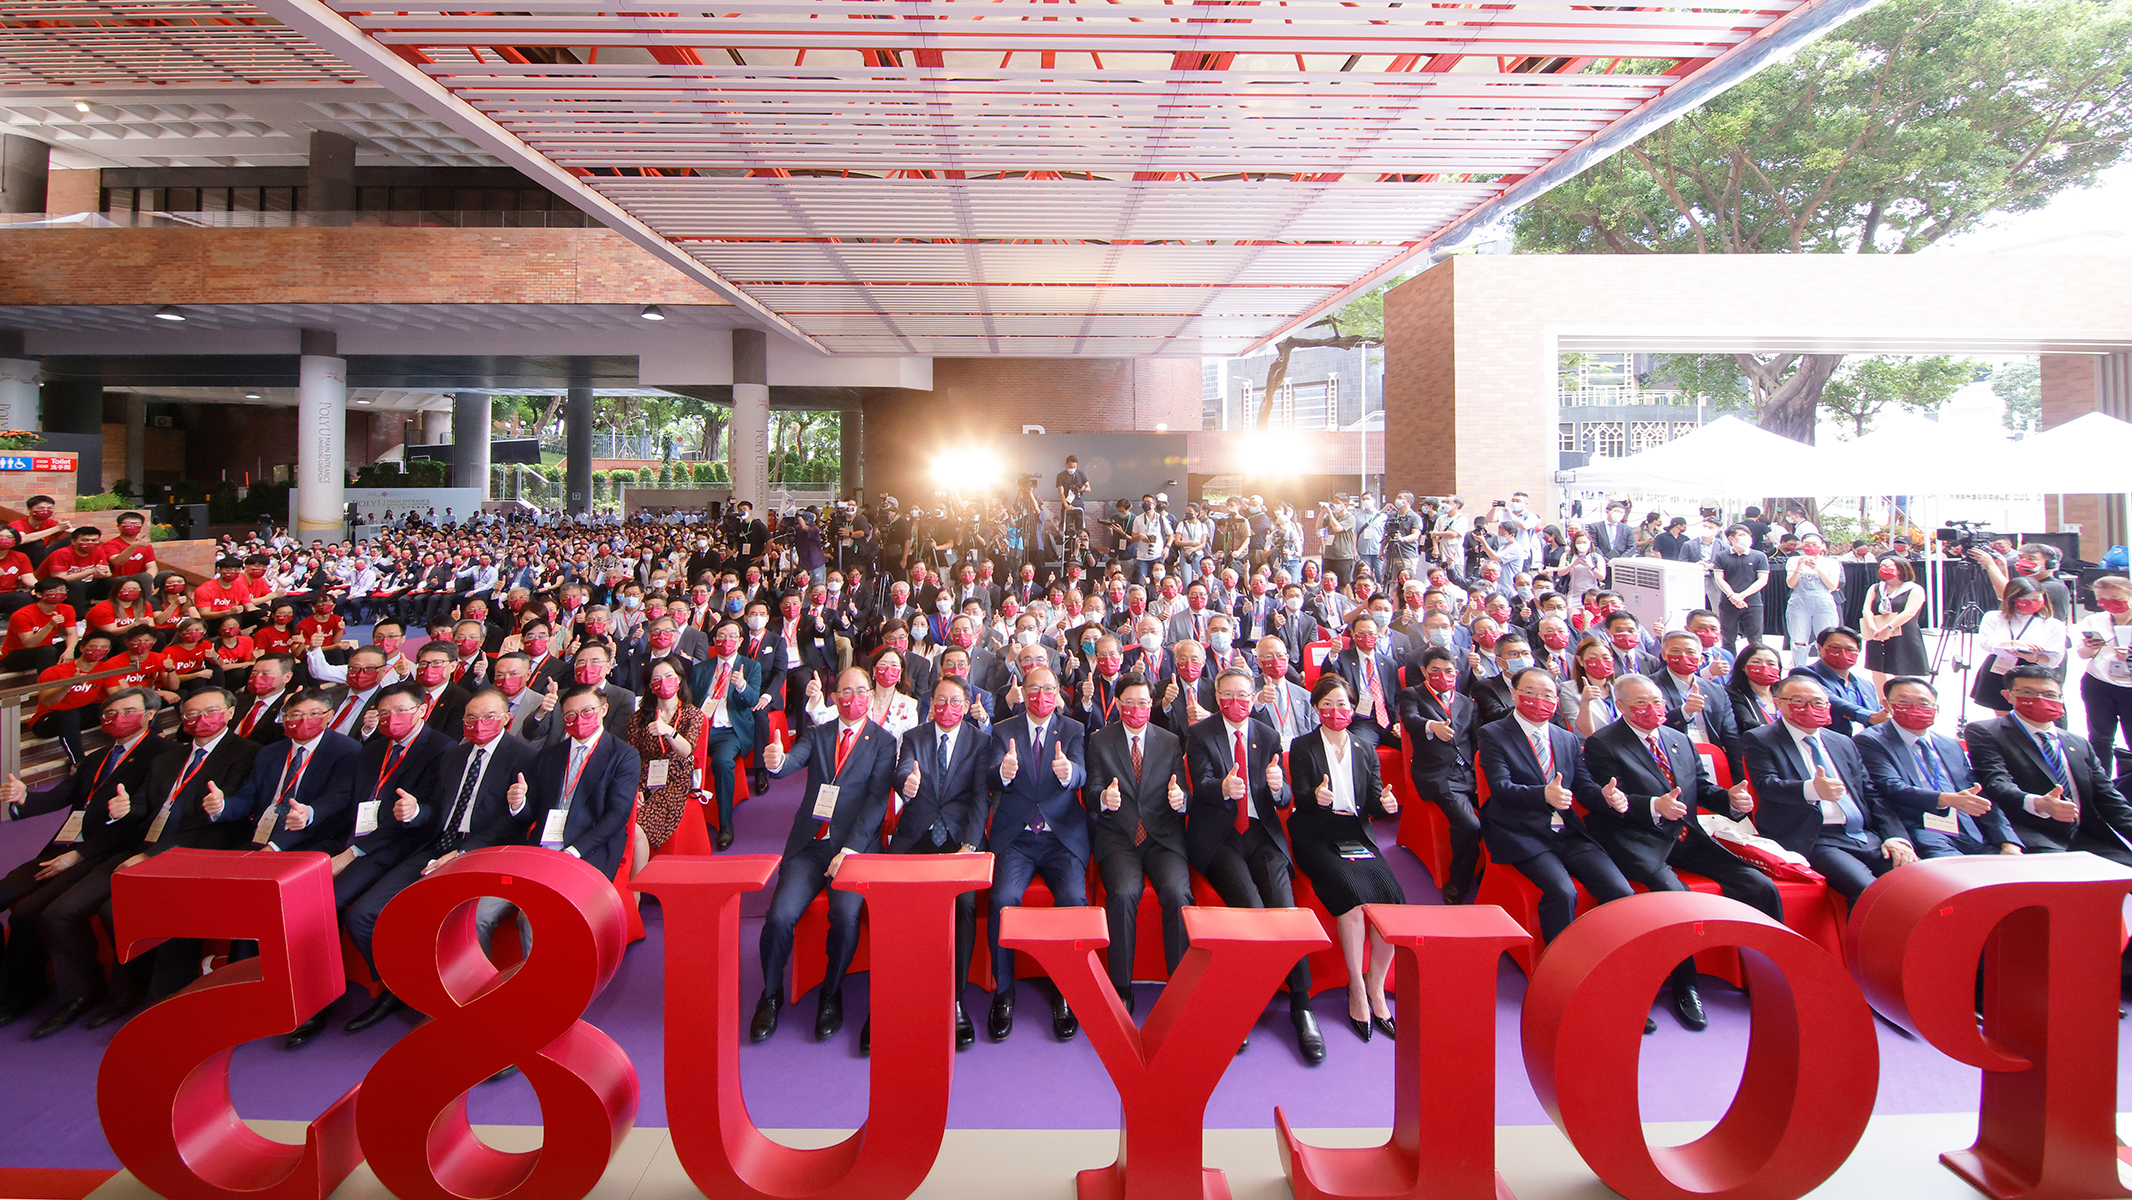 A new chapter for PolyU with the unveiling of the Main Entrance